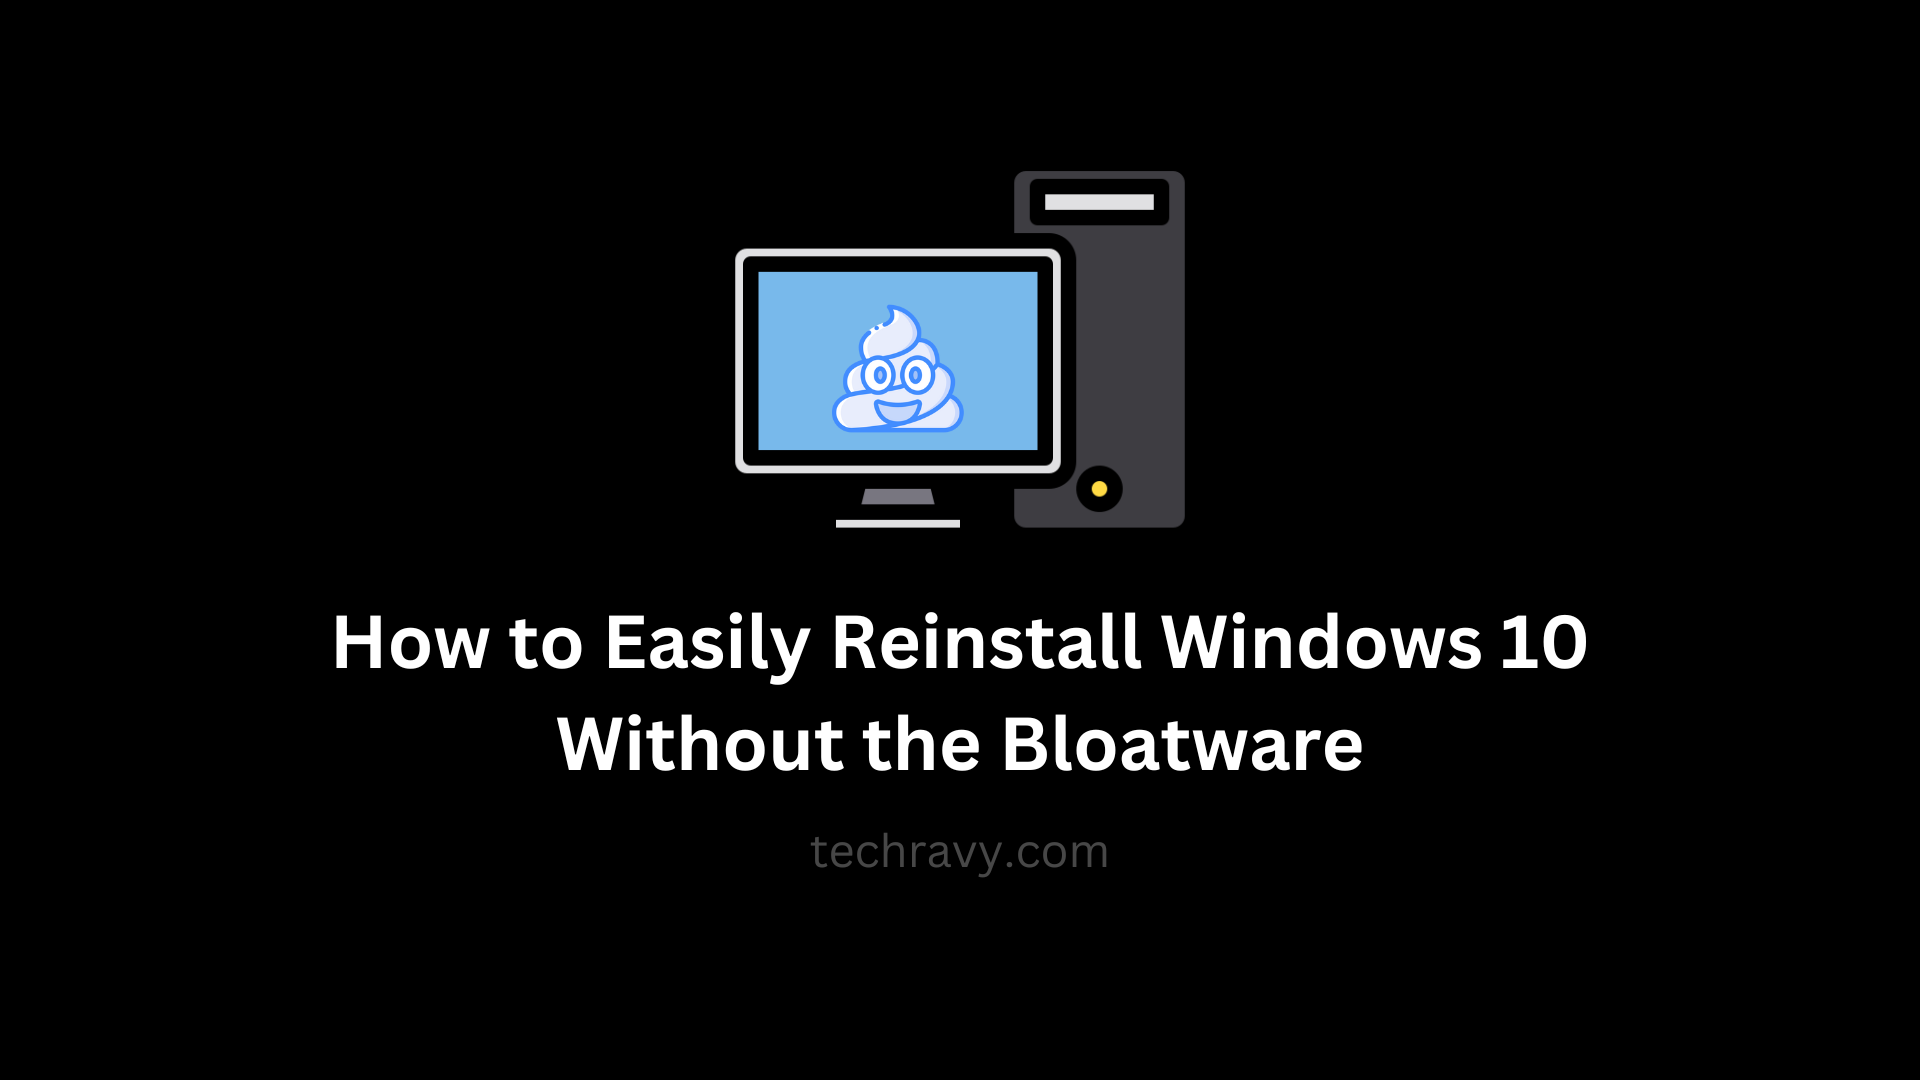 How to Easily Reinstall Windows 10 Without the Bloatware